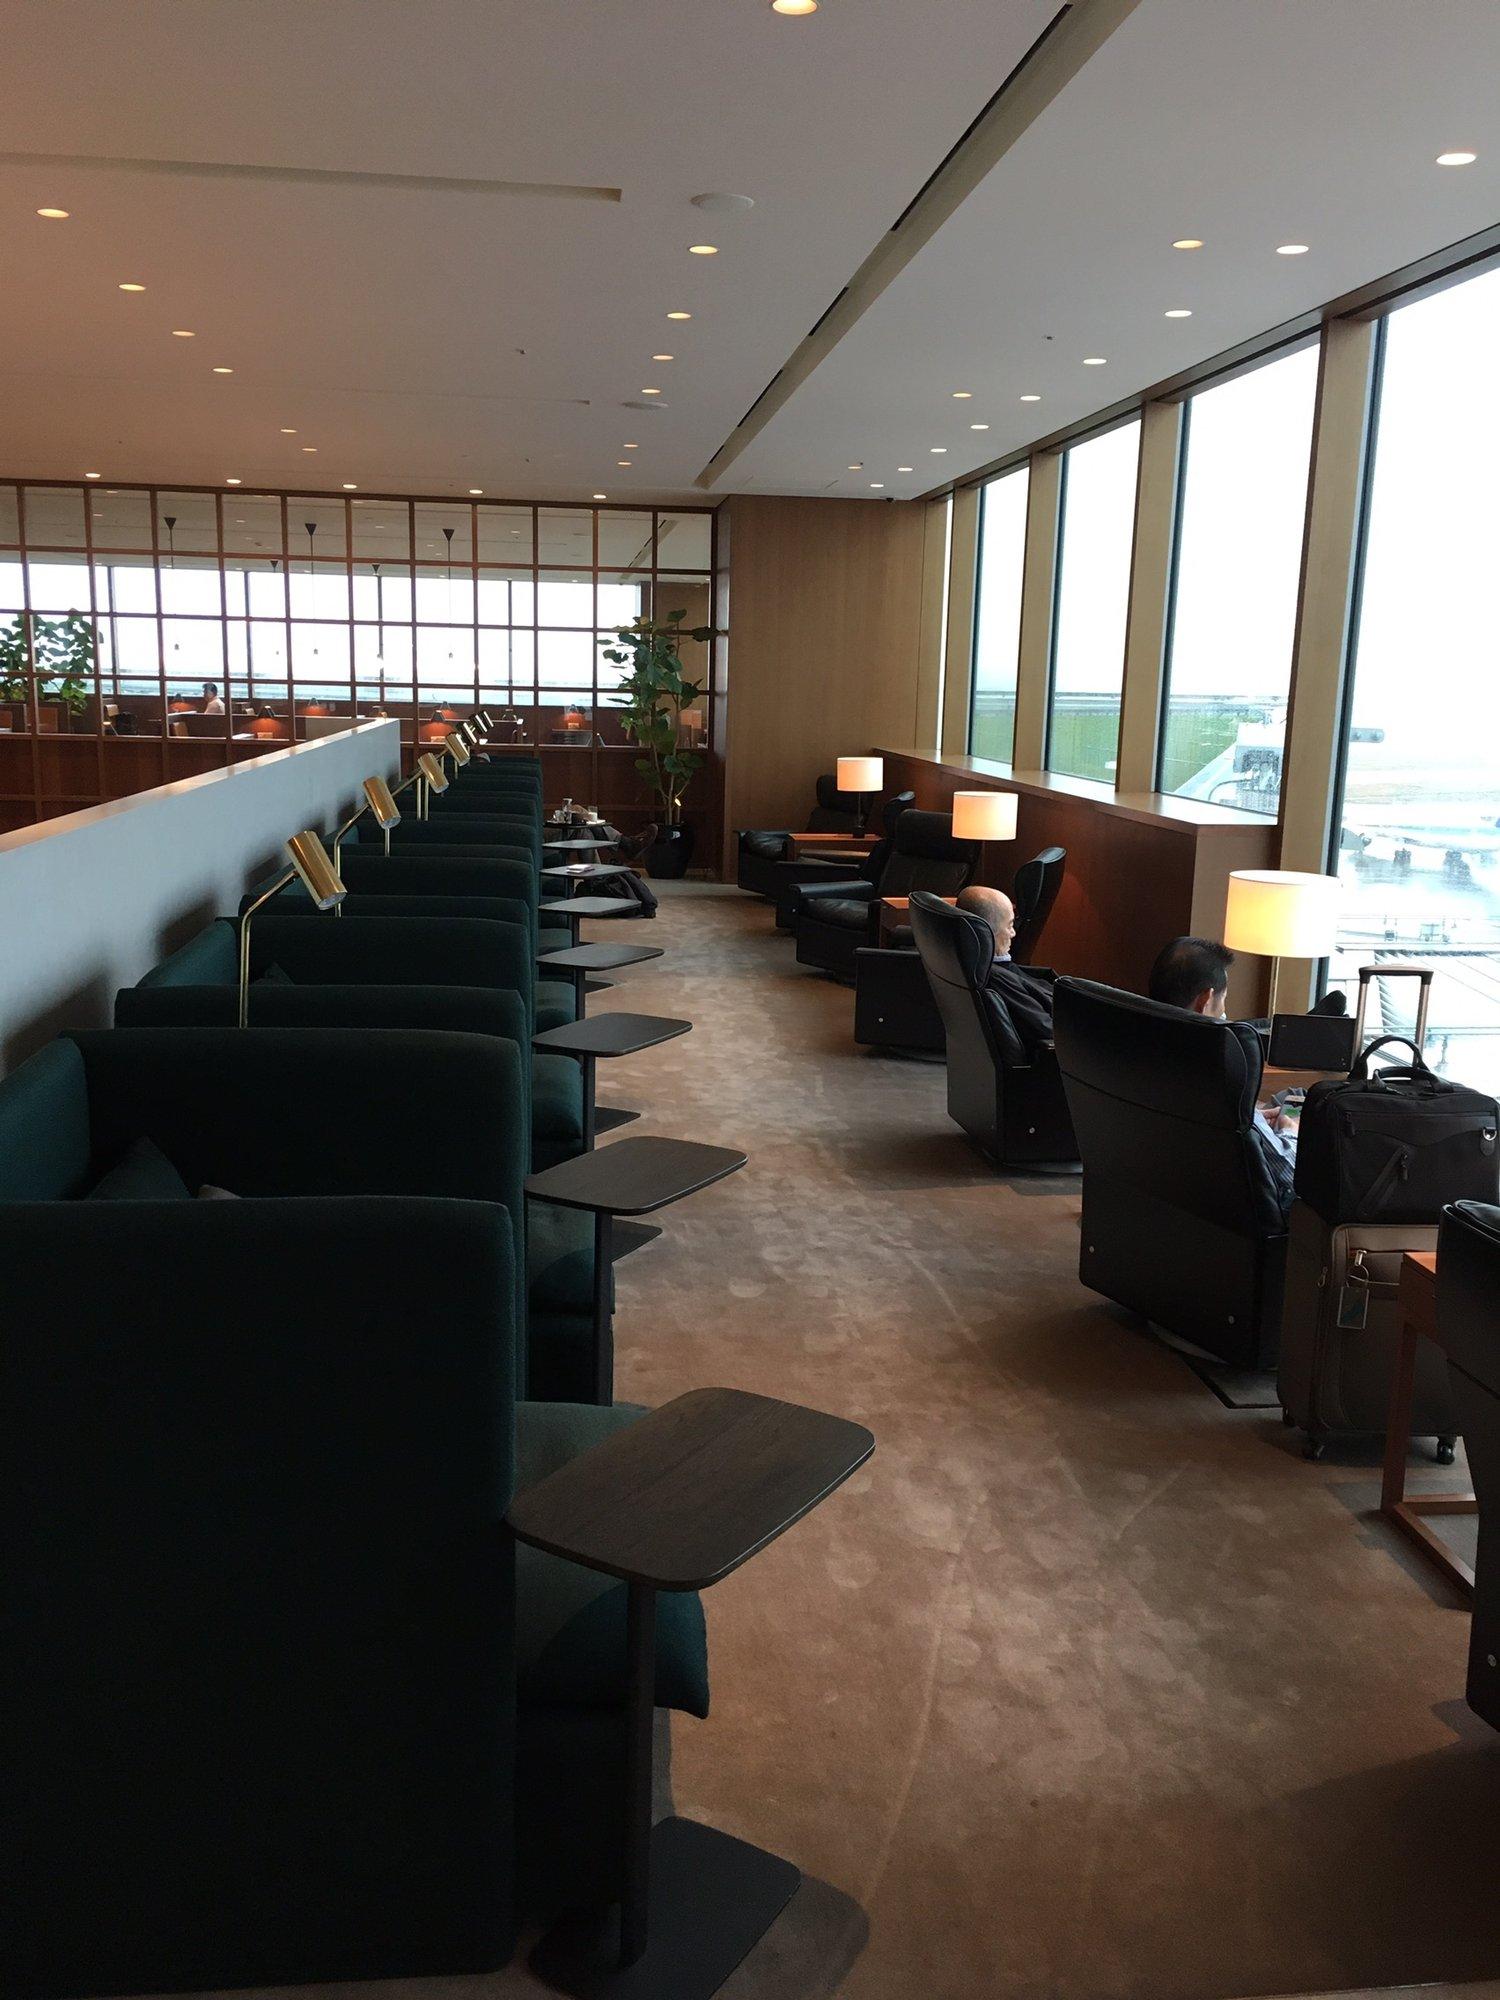 Cathay Pacific Lounge image 35 of 49